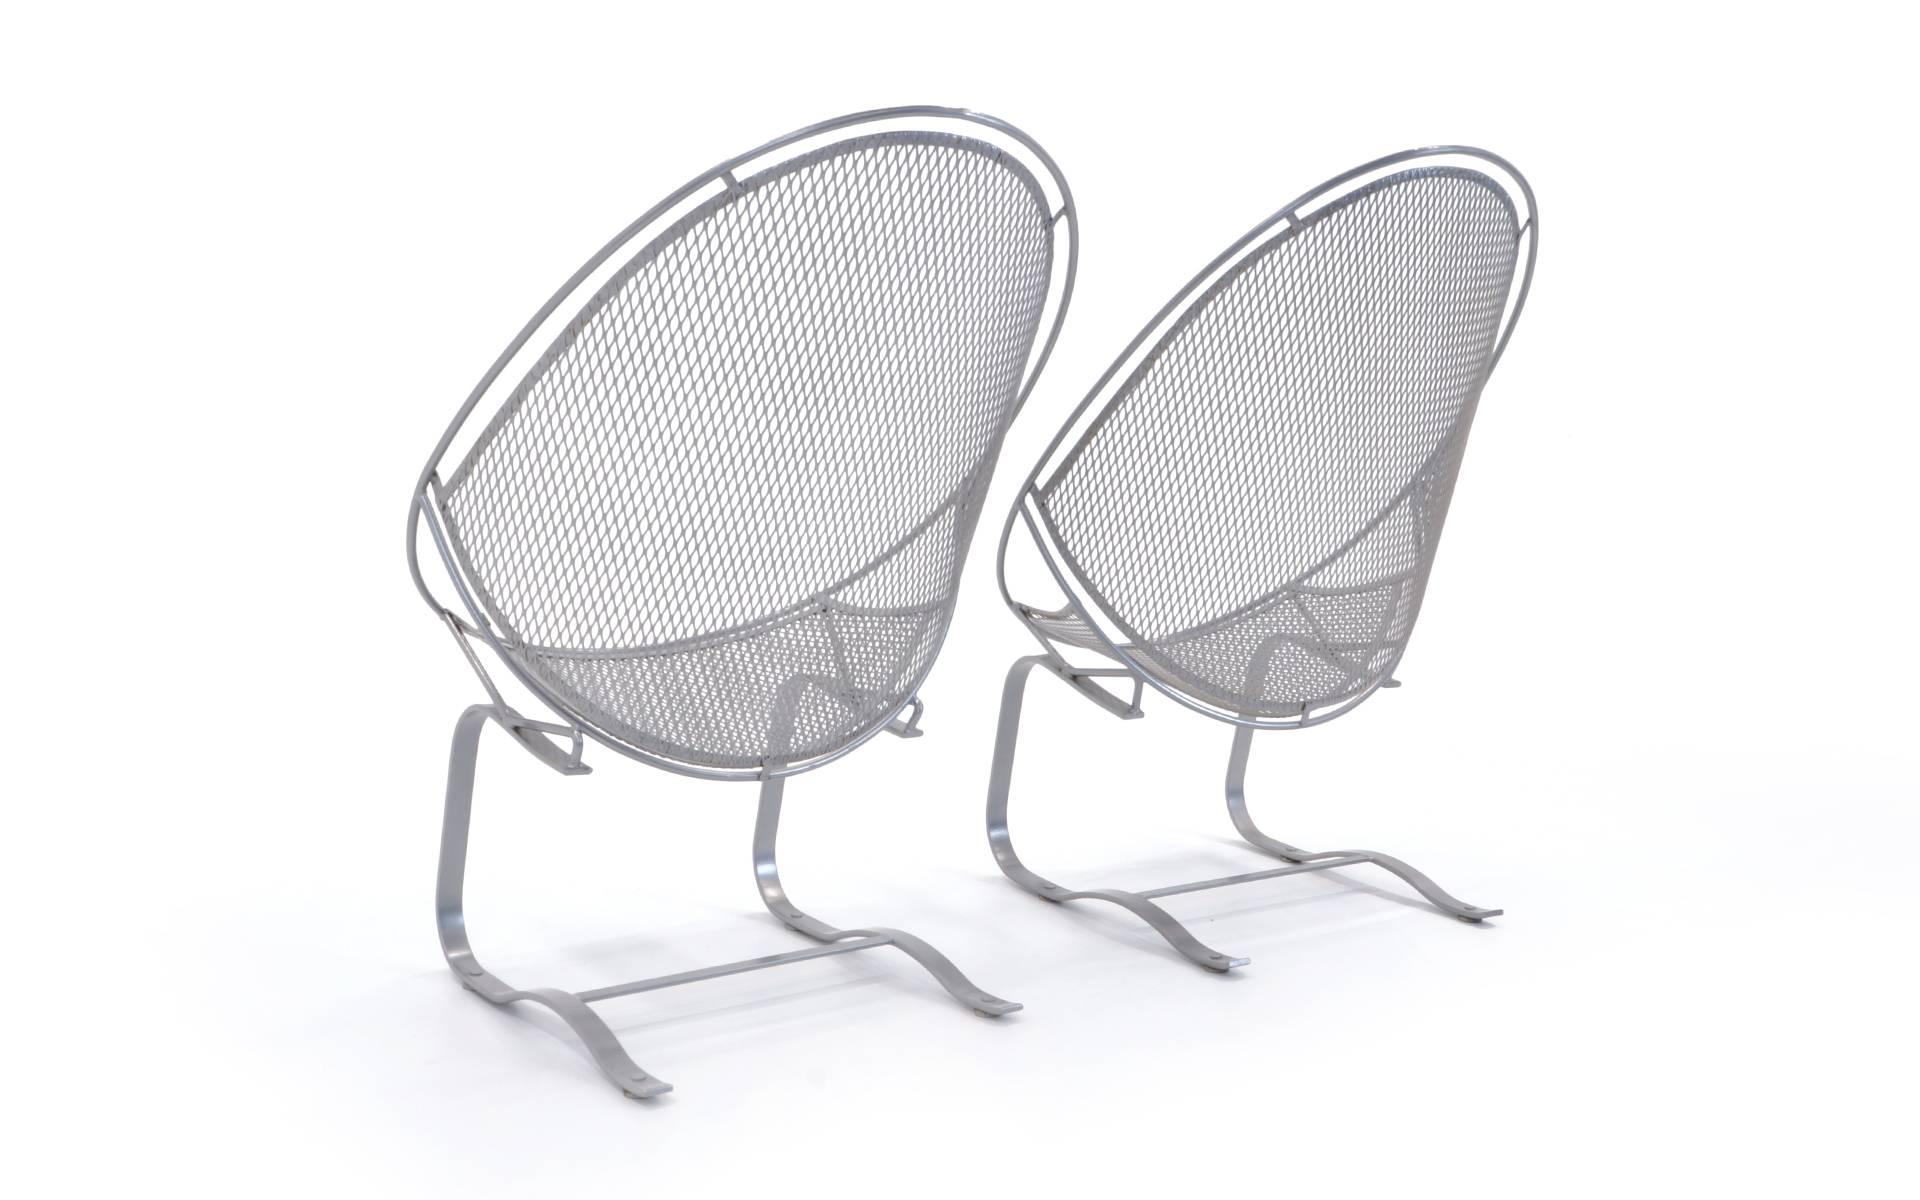 Powder-Coated High Back Rocker Patio Chairs w Footrest. John Salterini. Price is for the pair